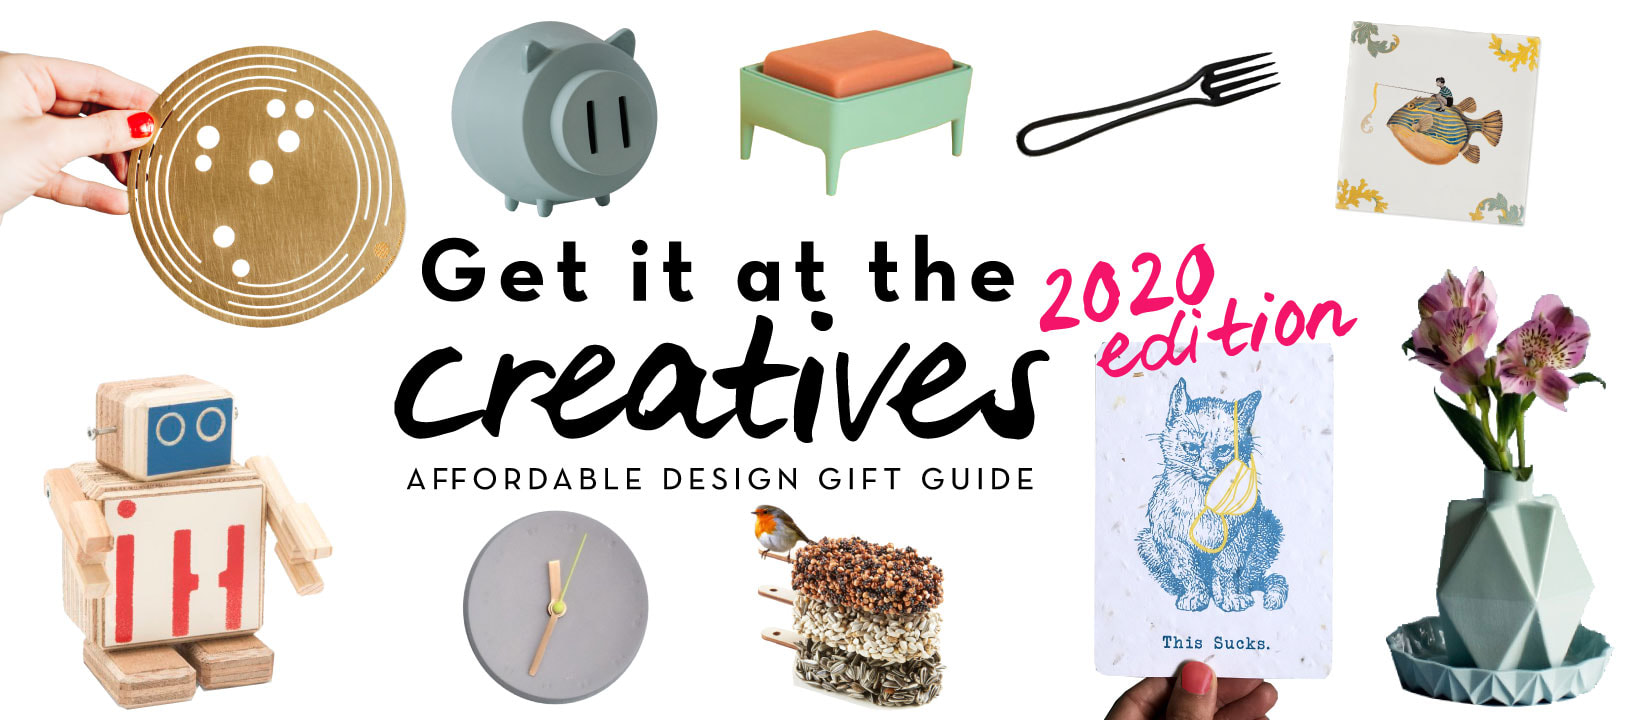 Get it at the Creatives gift guide - by House of Thol